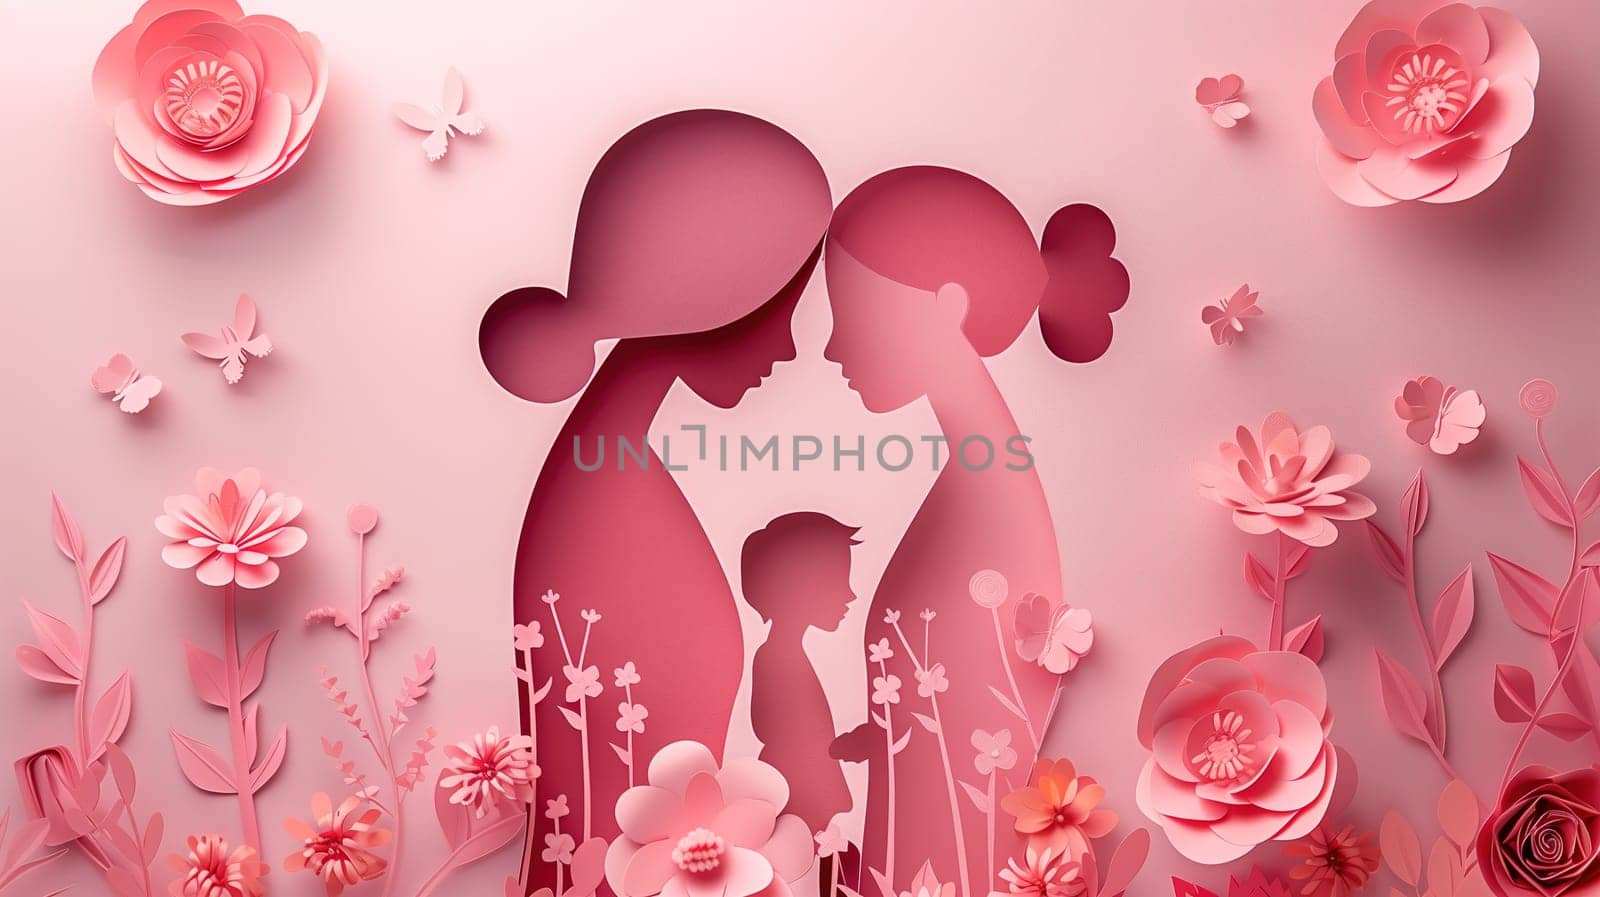 A paper cut depicting a mother and child standing in a field of colorful flowers. The intricate artwork shows the bond between the two figures as they are surrounded by natures beauty.